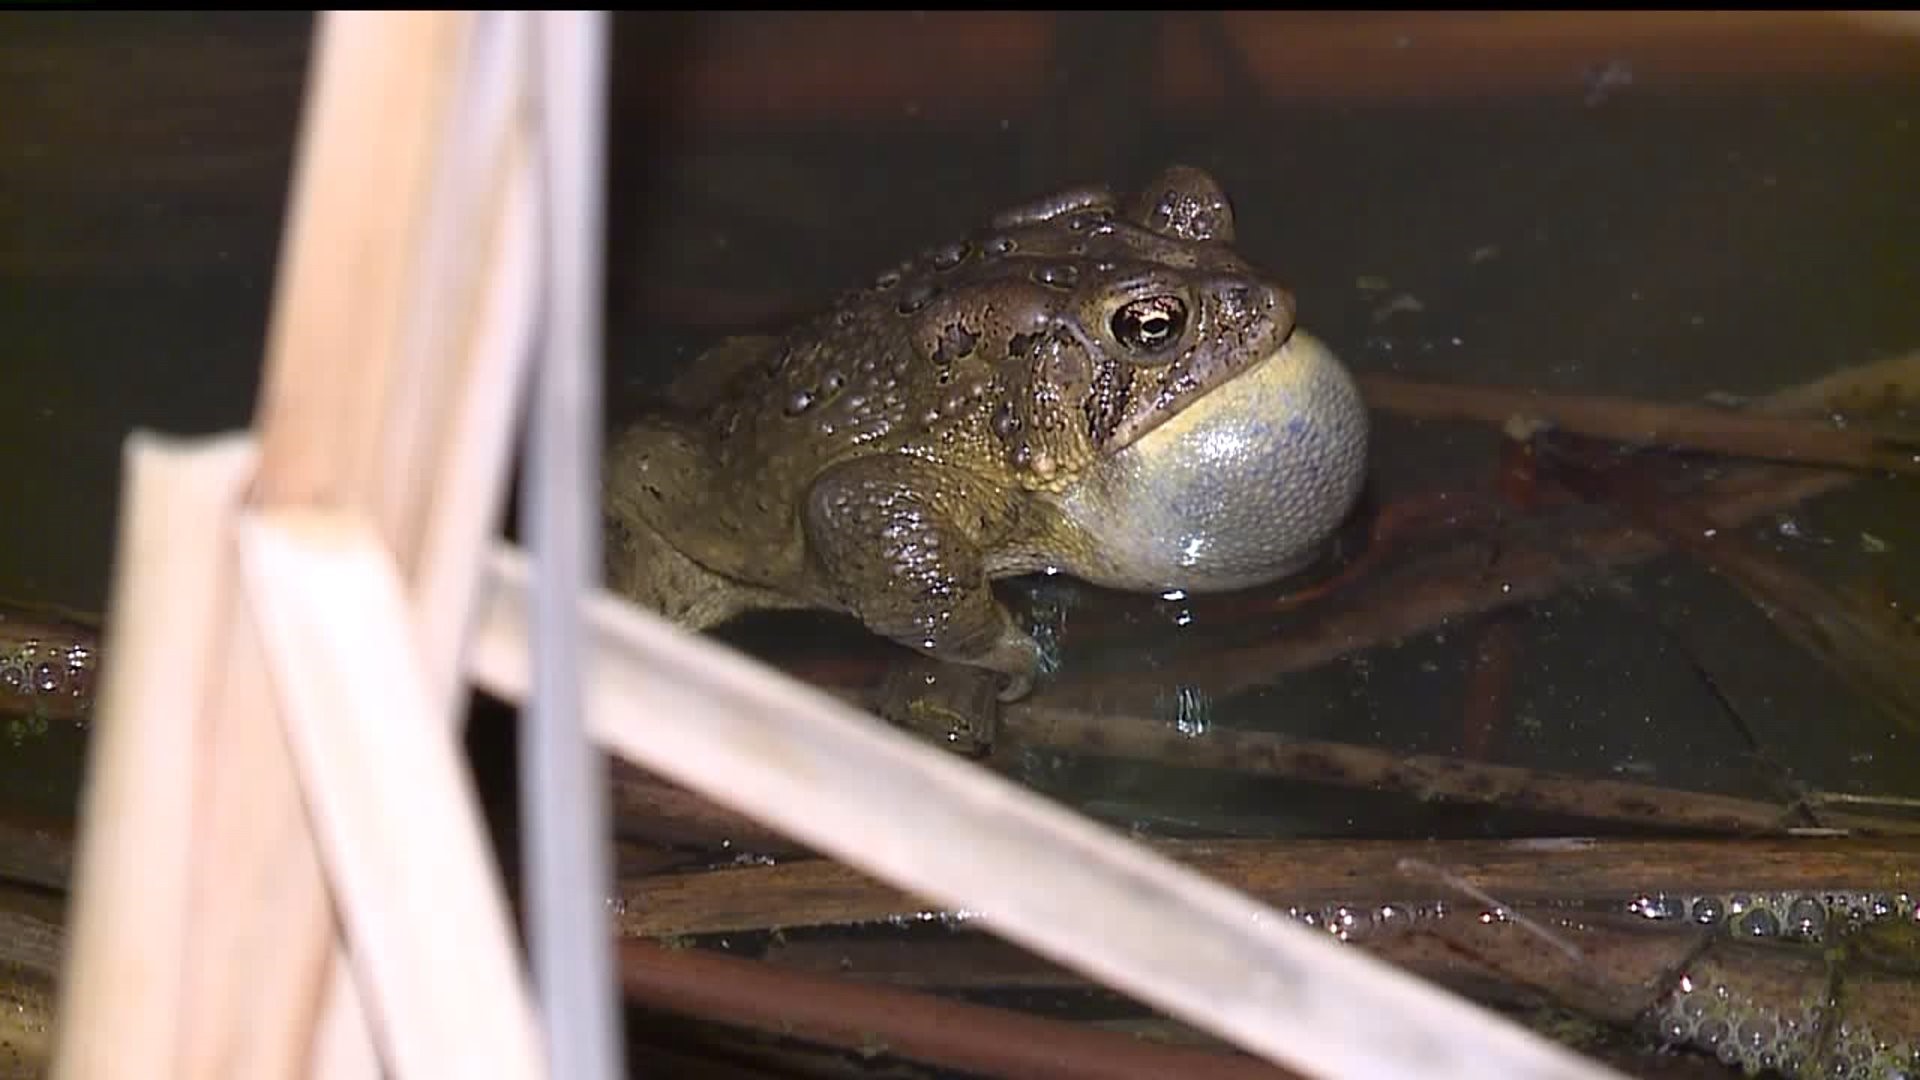 Volunteers in Lancaster Co. help toads cross roads to safety